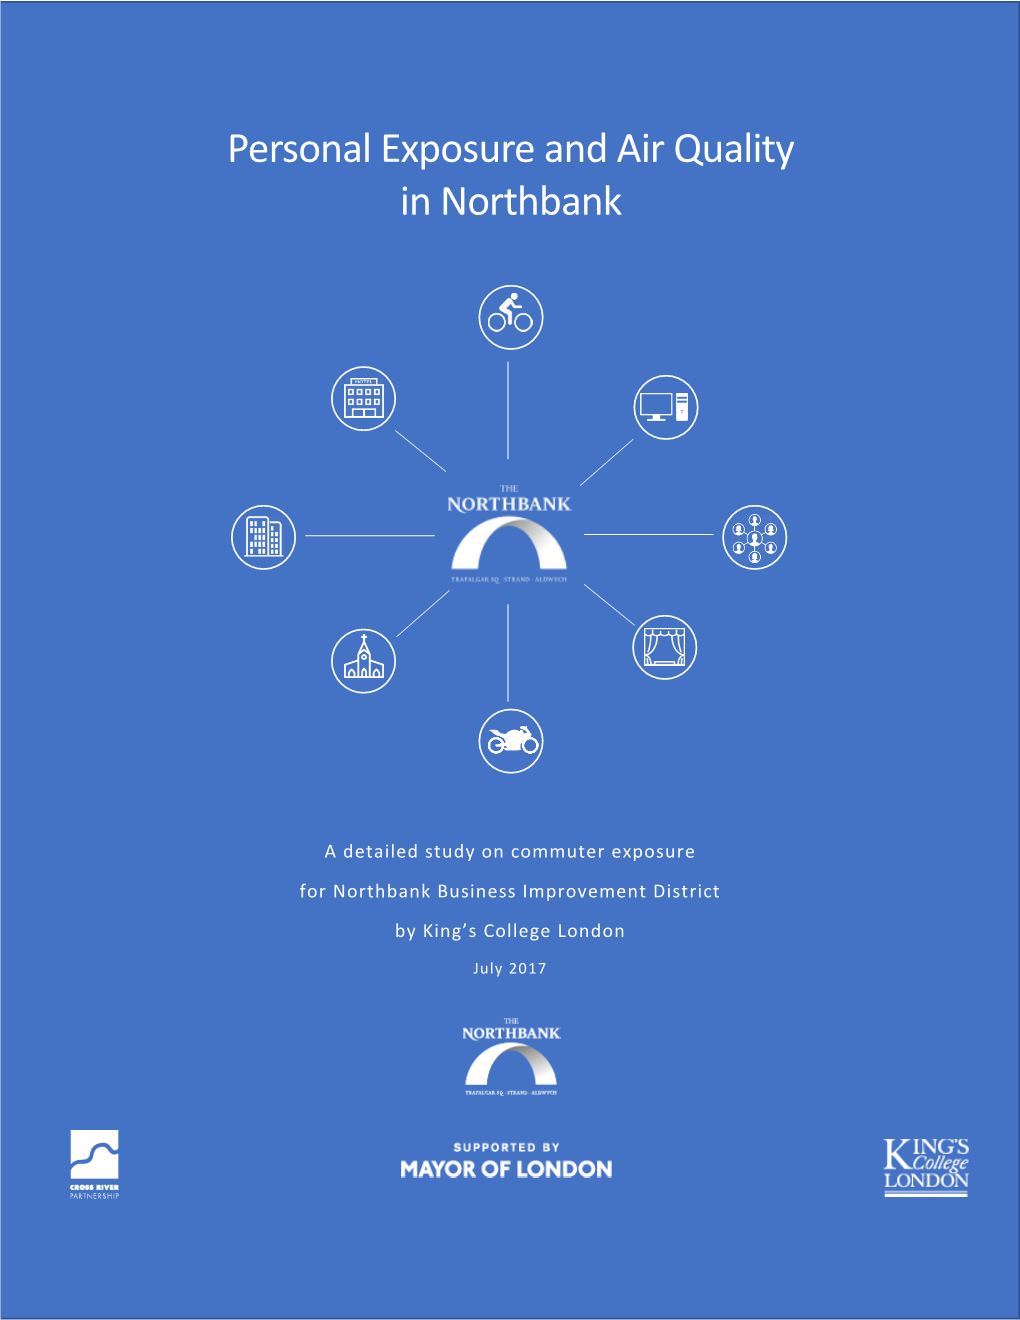 Personal Exposure and Air Quality in Northbank